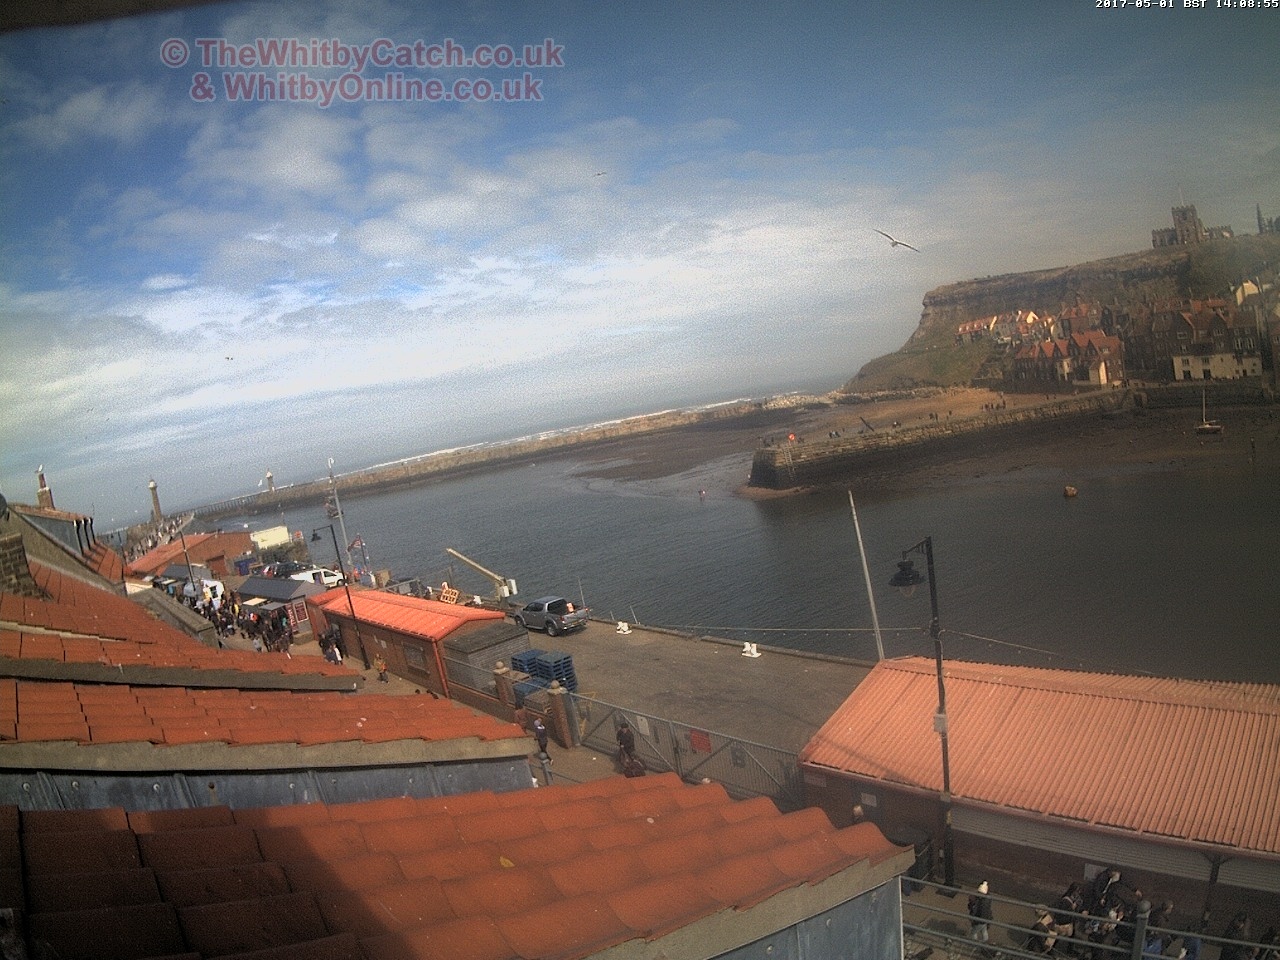 Whitby Mon 1st May 2017 14:09.